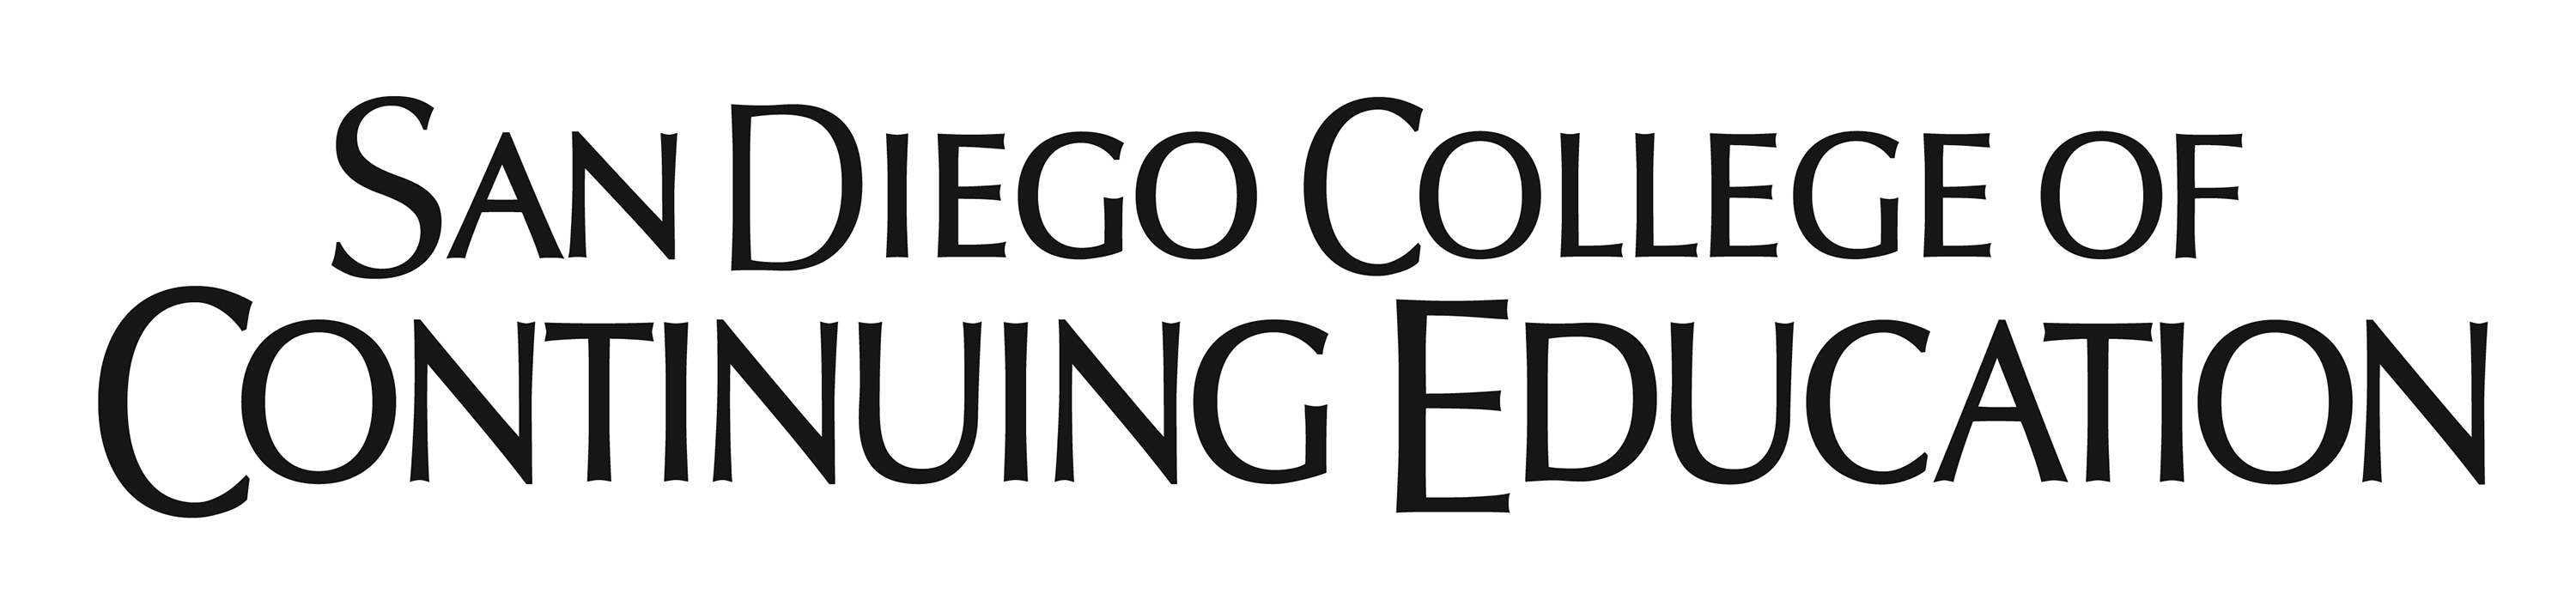 San Diego College of Continuing Education primary